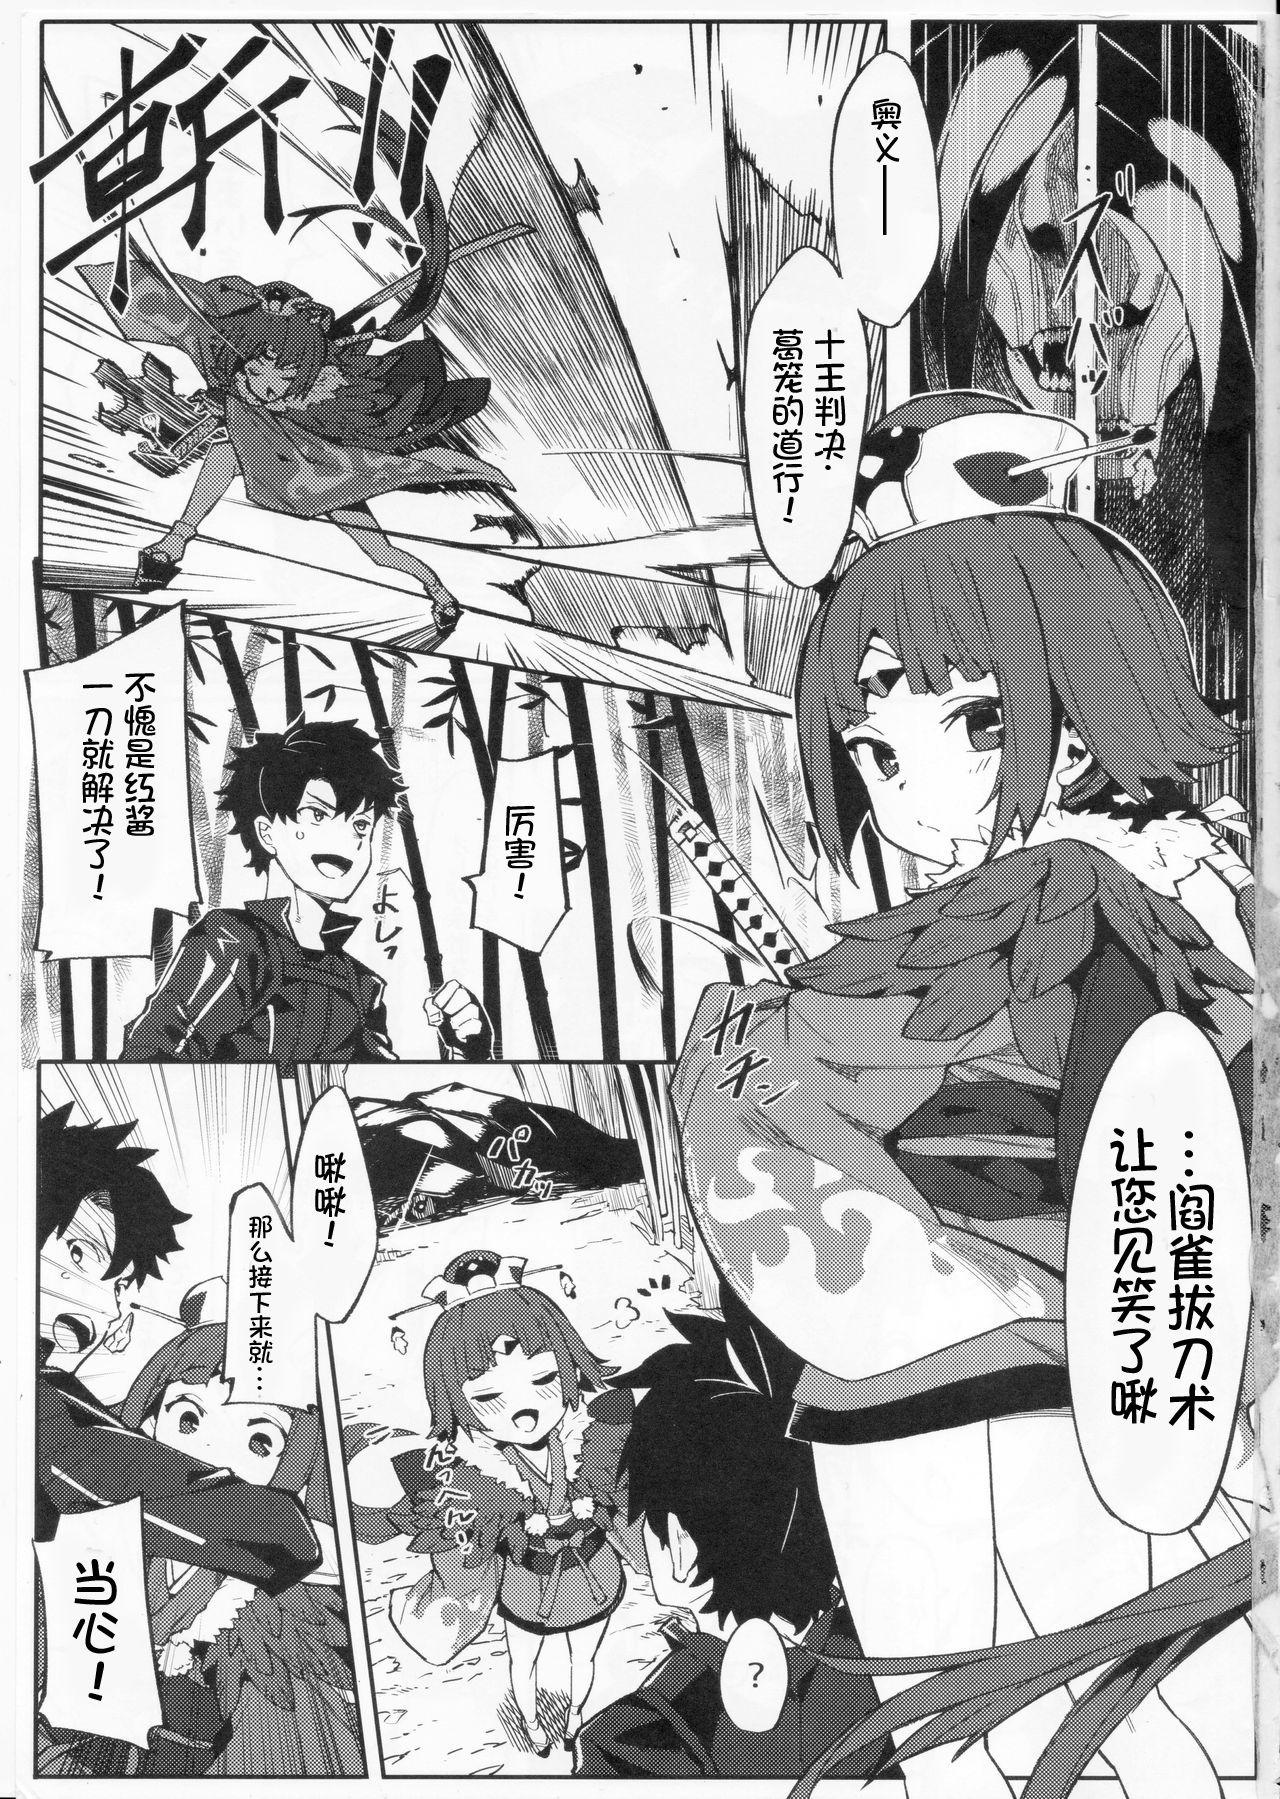 Ass Licking Enmatei Ryouyou-ki - Fate grand order Fit - Page 3